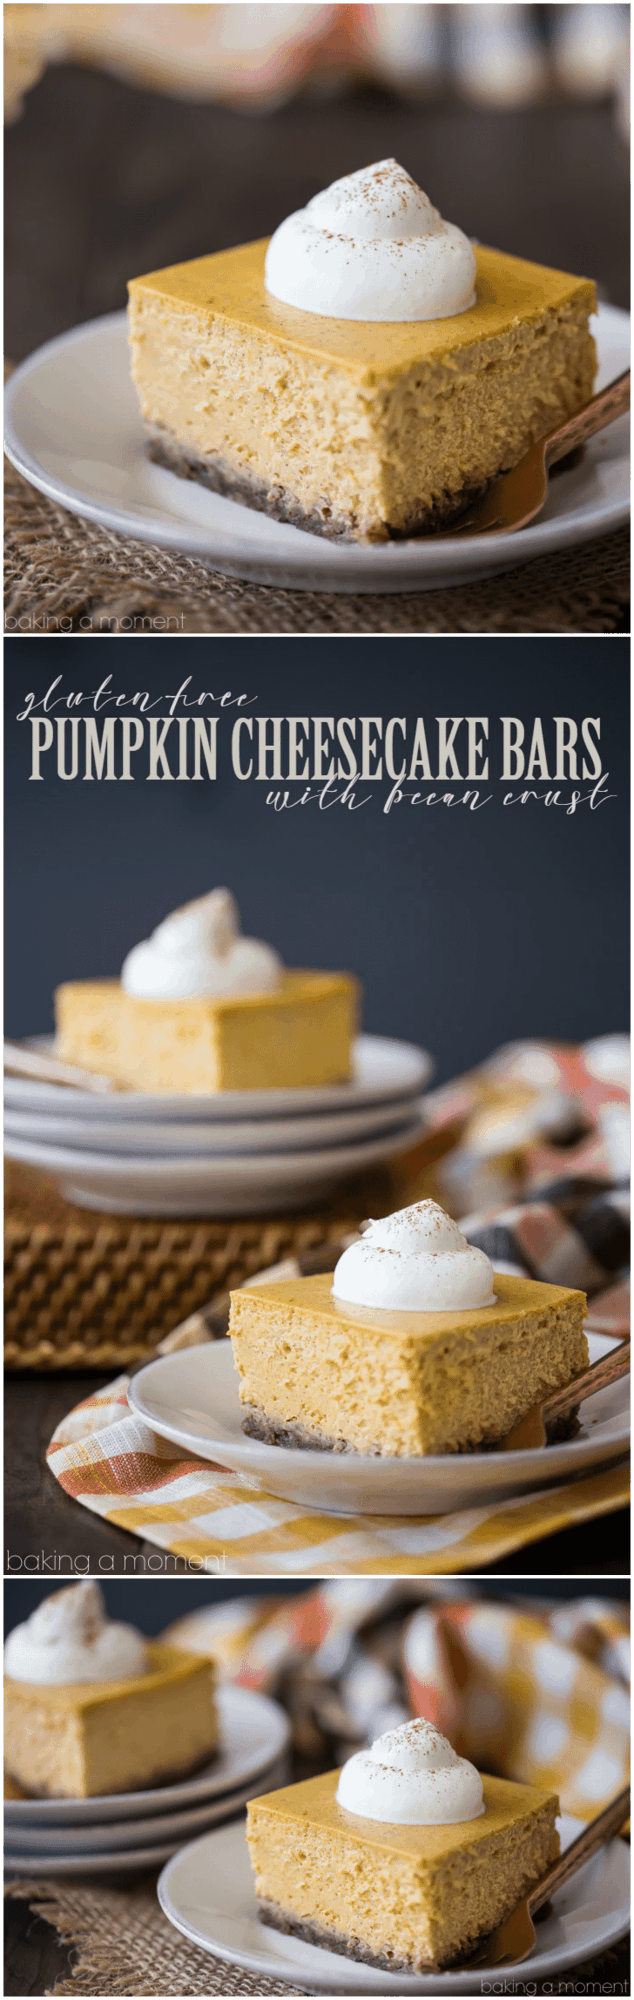 Pumpkin Cheesecake Bars: Cool, creamy, and infused with real pumpkin & spice. Loved that these were naturally gluten-free, that nutty crust is perfection! 